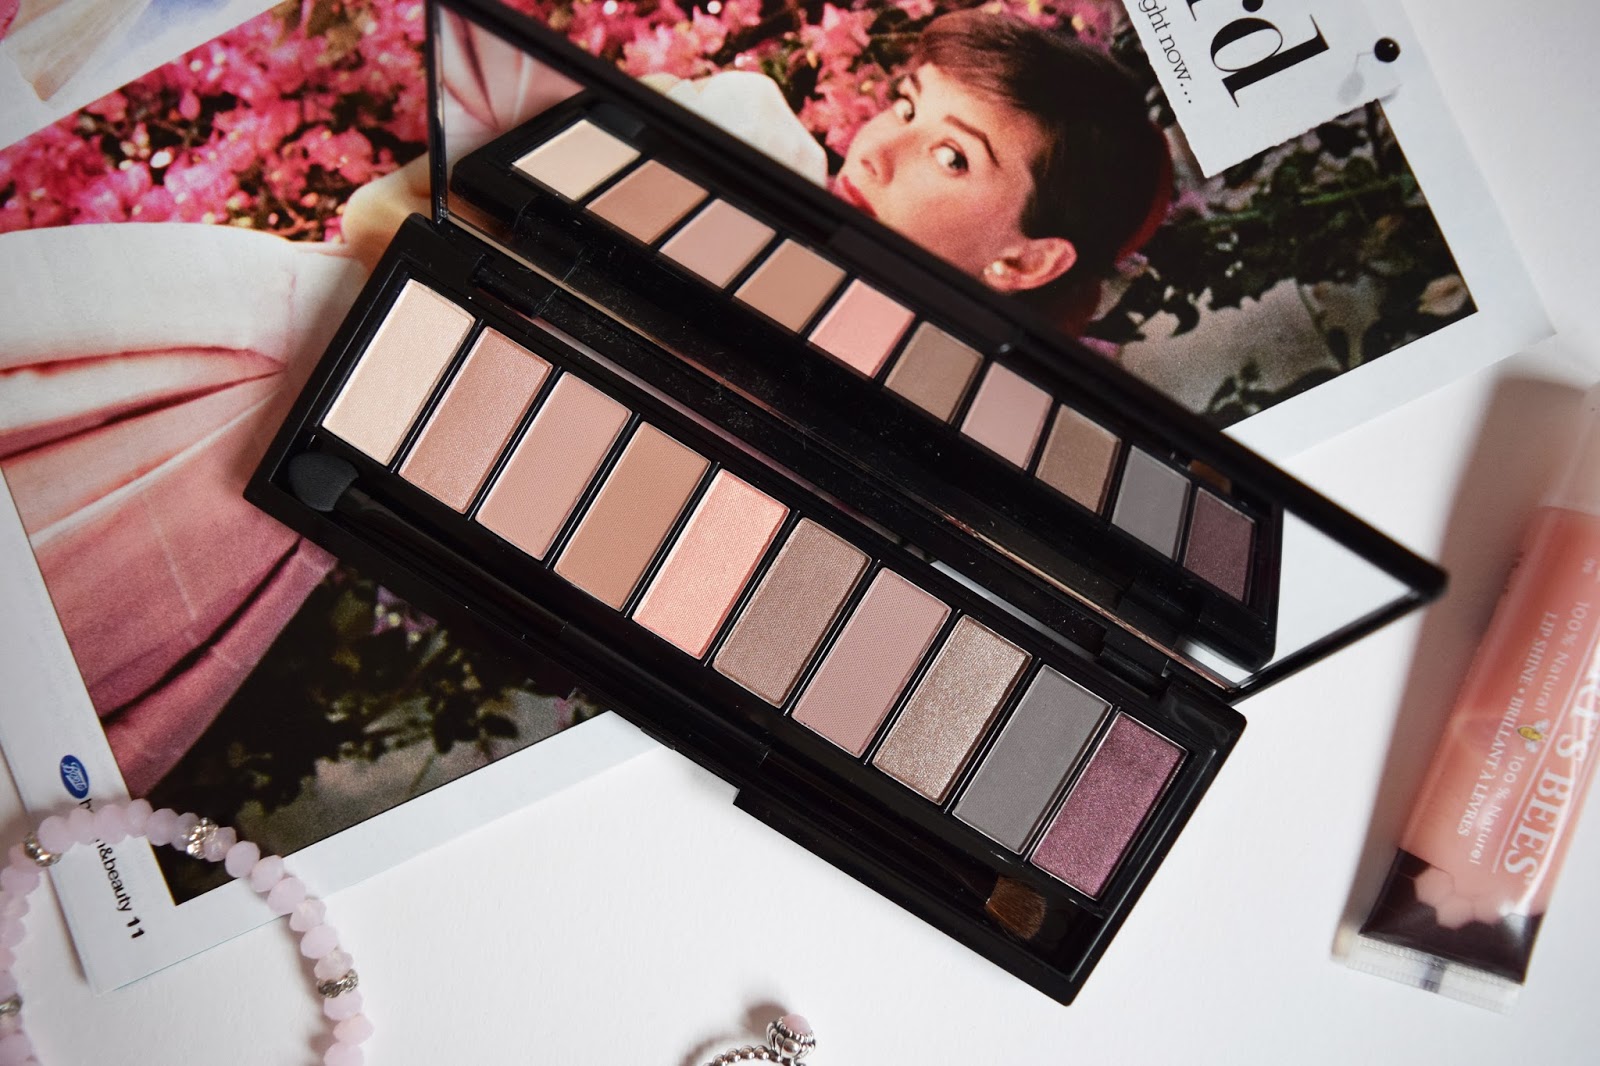 the nude rose palette lying open showing the range of pinks and purple shades inside